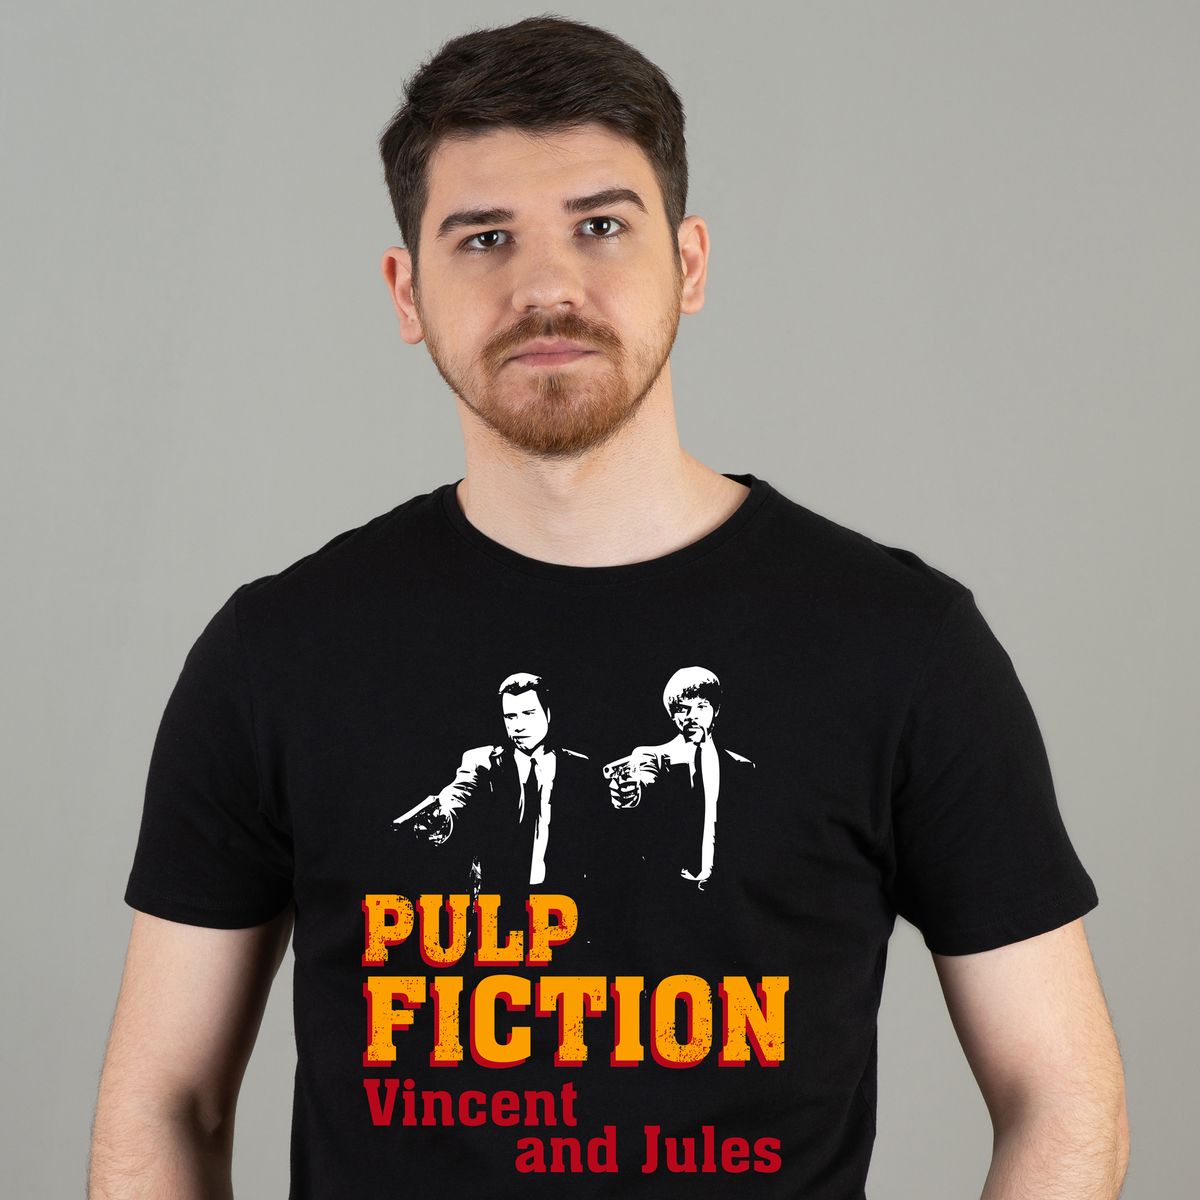 Nome do produto: Pulp Fiction - Vicent and Jules 2